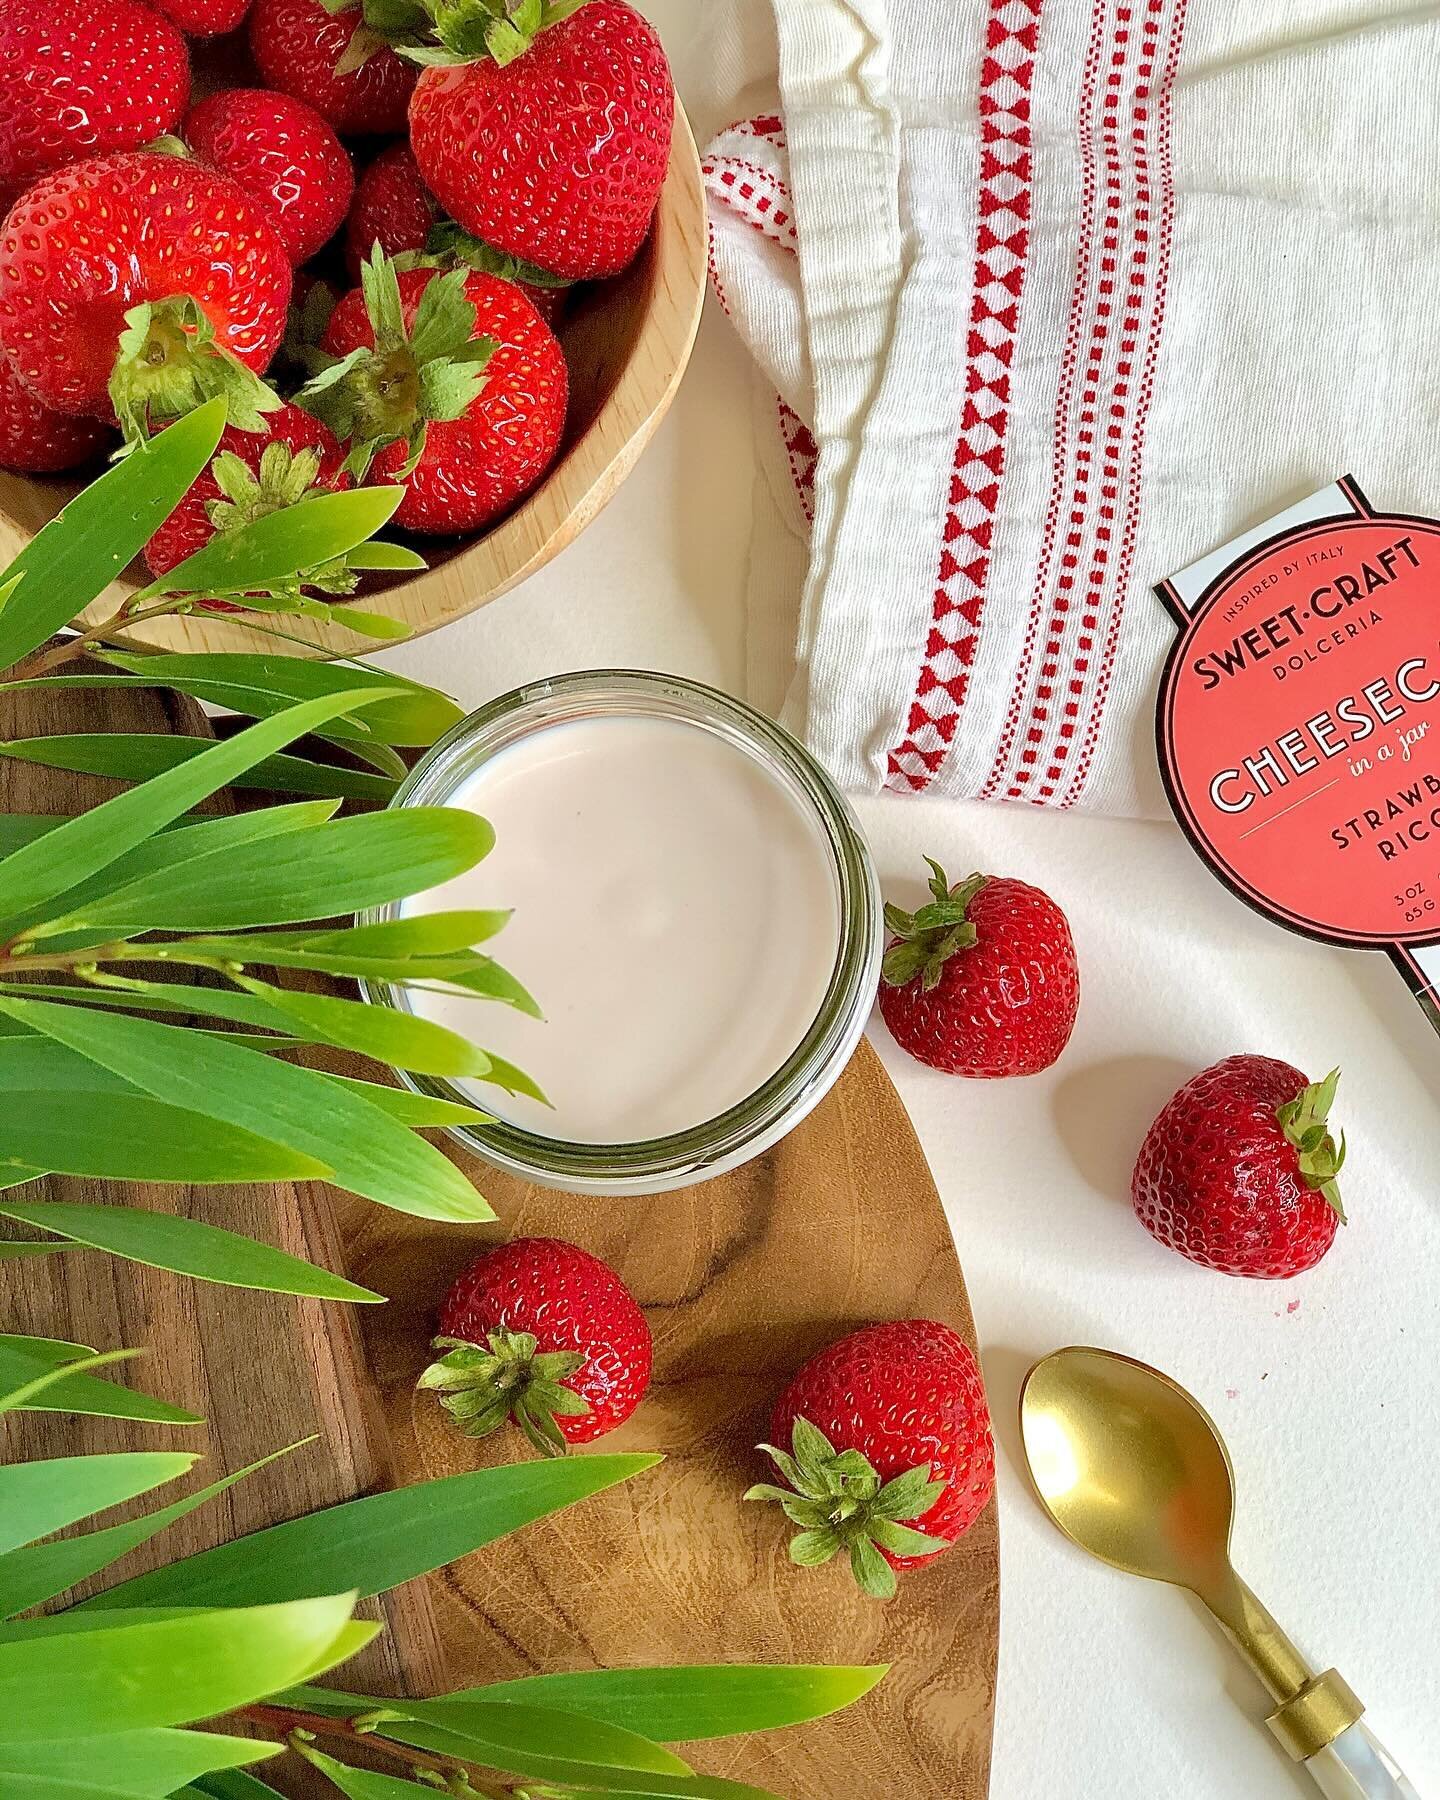 Spring is officially here and we have our eyes on the freshest of flavors&hellip;Strawberry Ricotta Cheesecake 🍓🍓🍓 How are you celebrating warmer days?

#SweetCraftDolceria #Strawberry #springishere